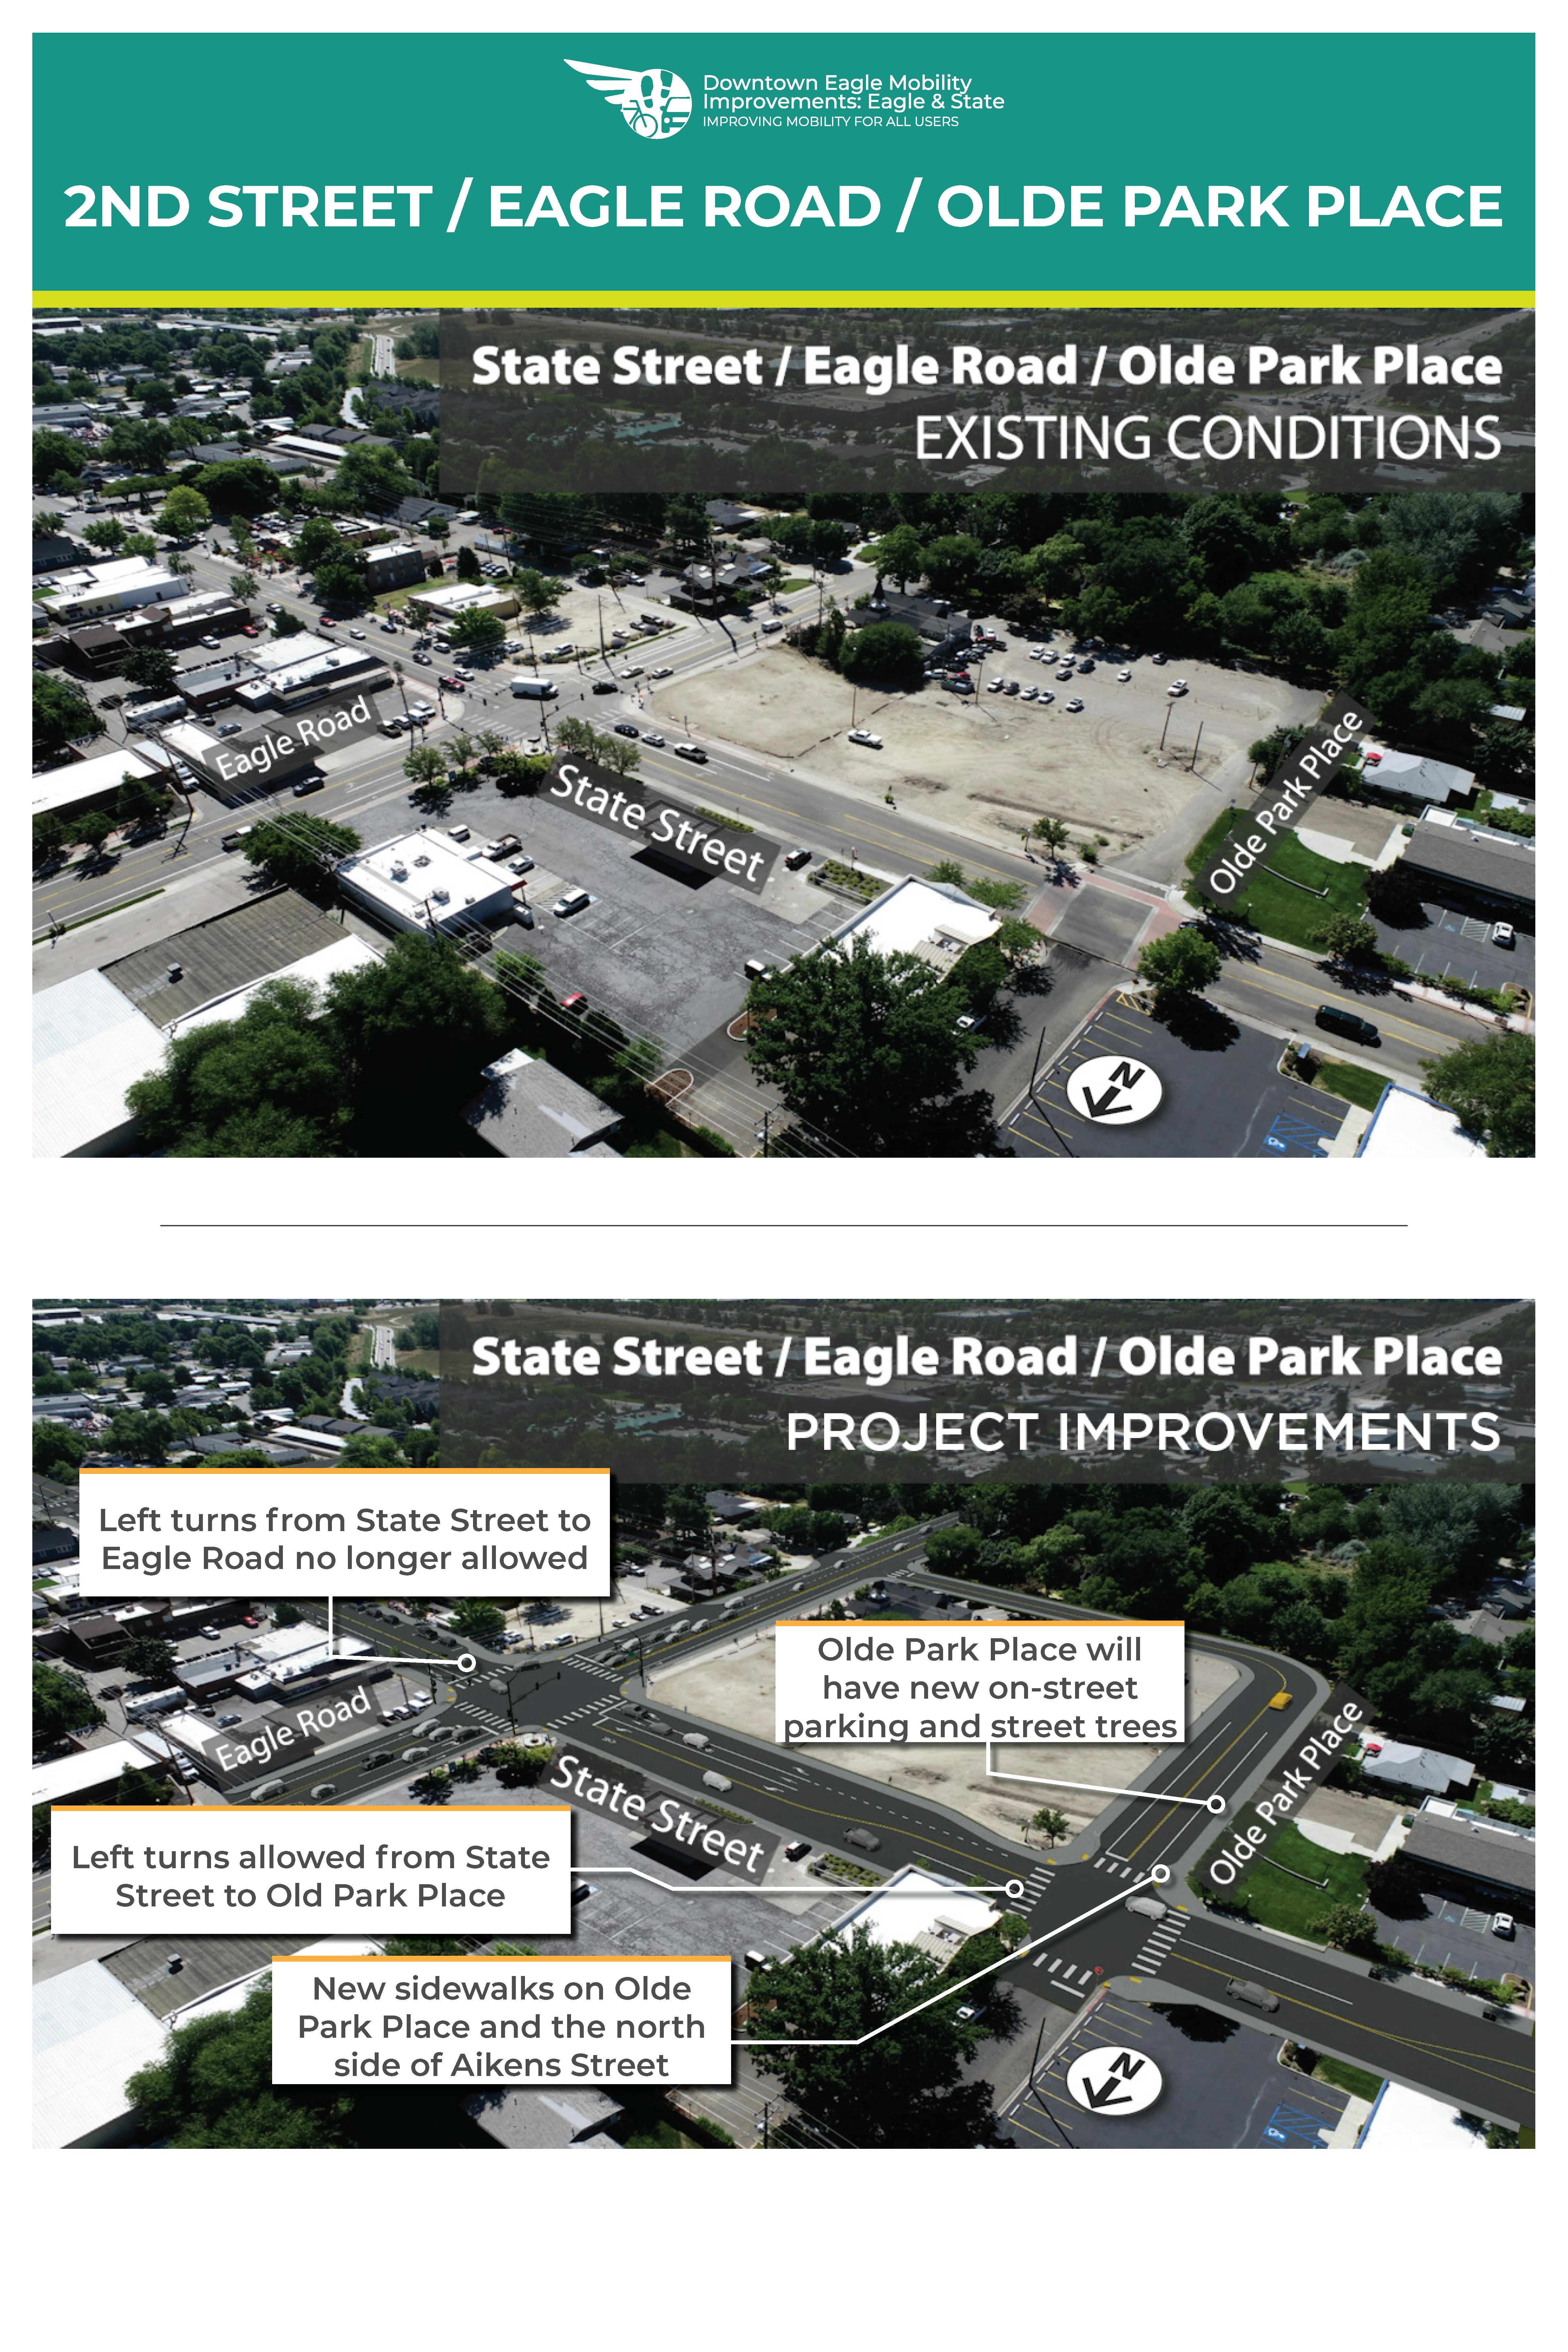 2nd Street/Eagle Road/Old Park Place Existing and Improvements.png